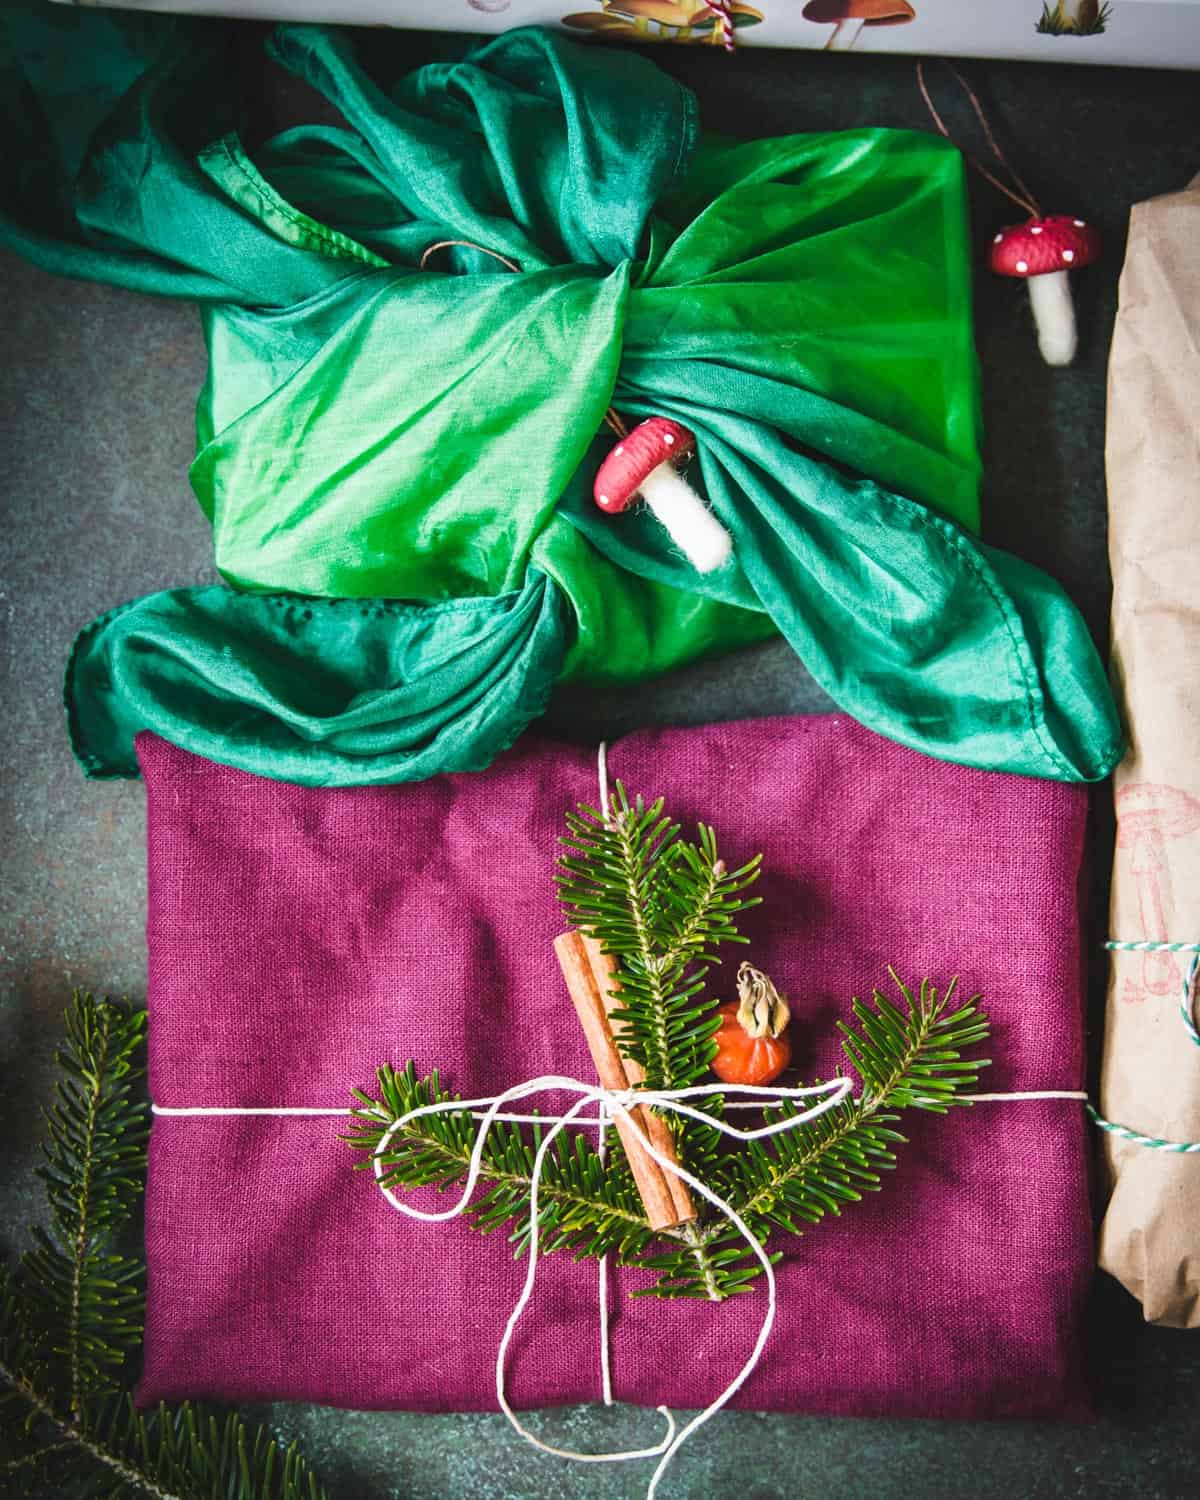 Dark grey background with 2 presents wrapped in fabric, one a deep magenta with white twine and a green pine tree twig with a cinnamon stick on top, and the other an ombre green silk fabric that is tied around the present, with felted wool mushrooms adorning. 